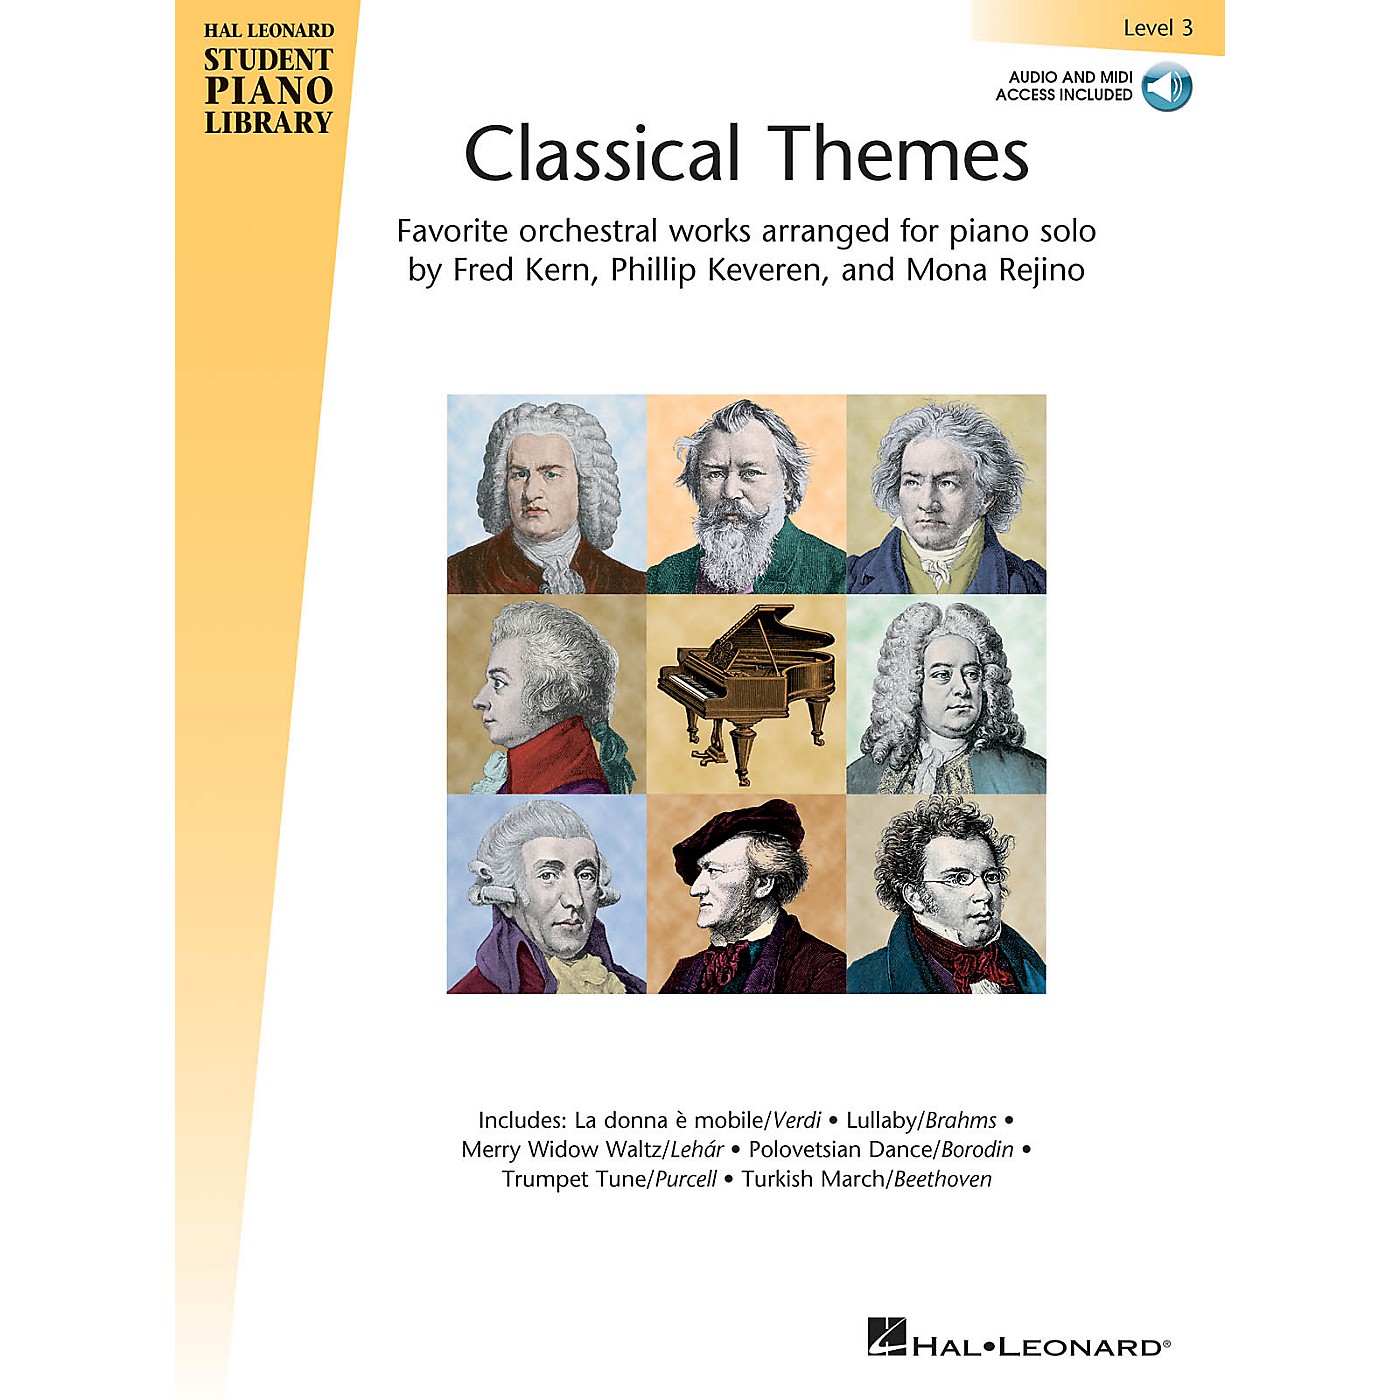 Hal Leonard Classical Themes - Level 3 Piano Library Series Book Audio Online thumbnail